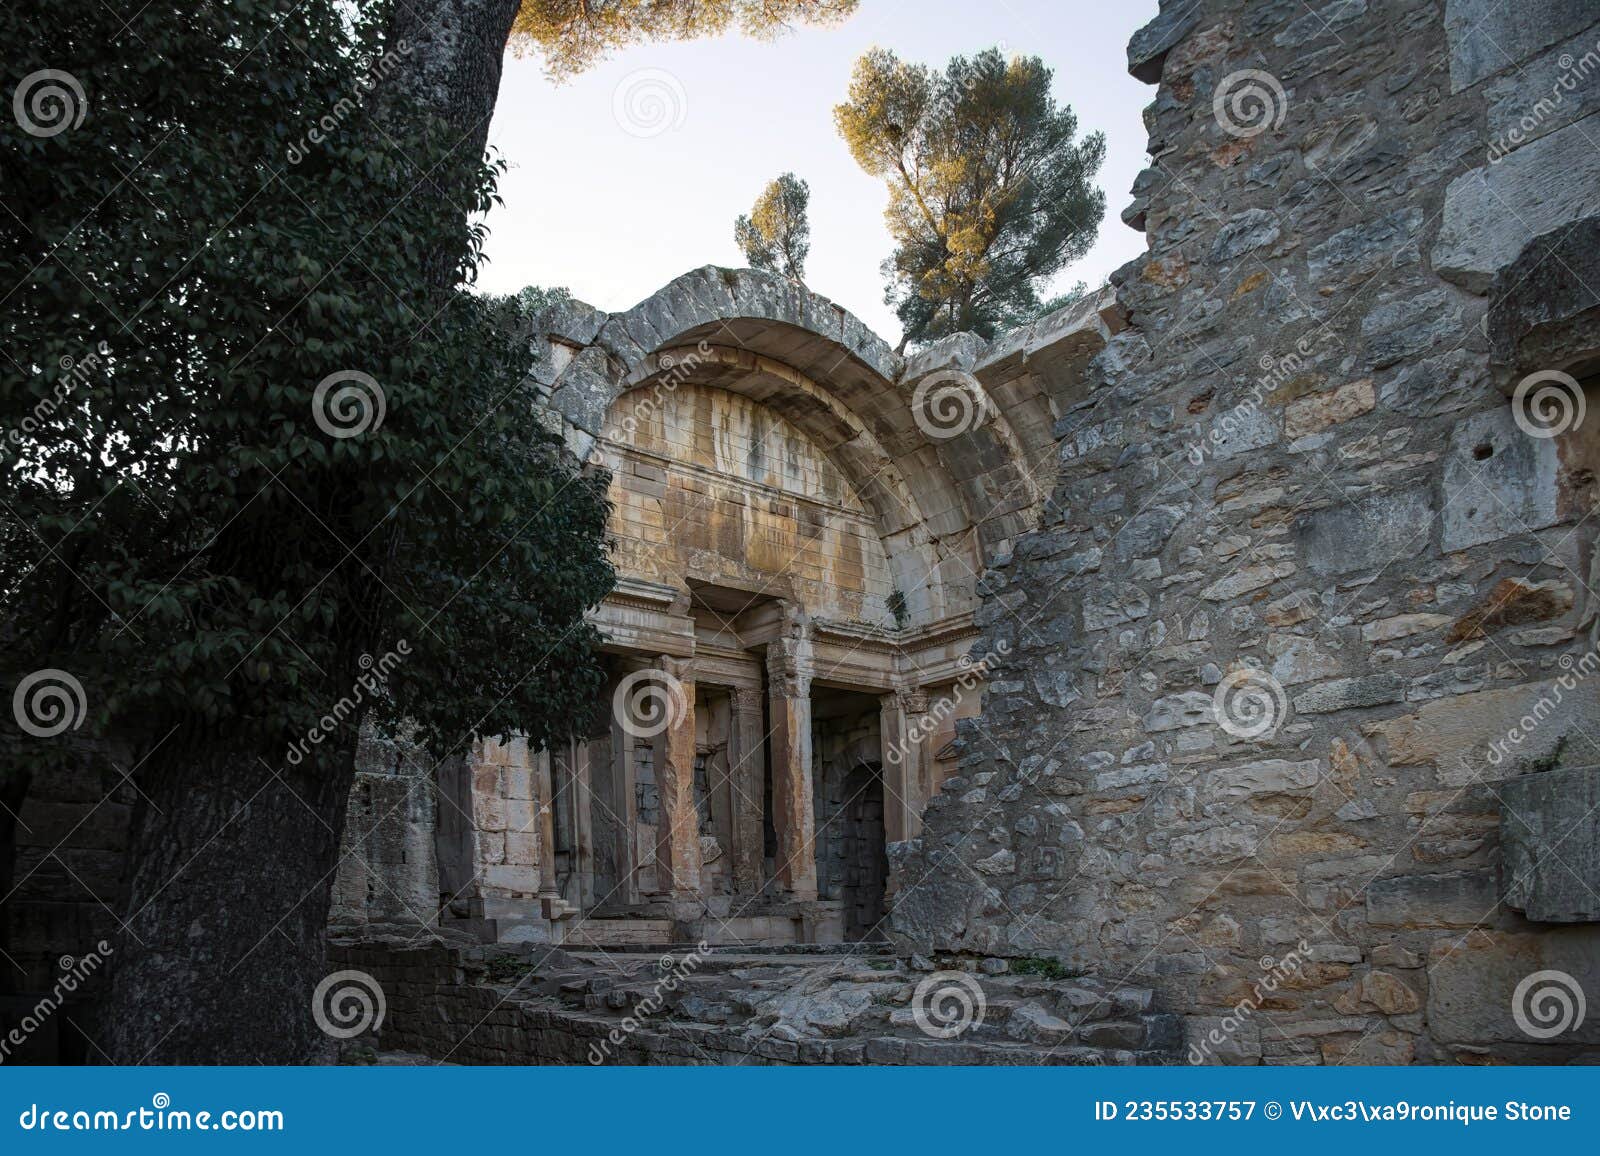 detail of the temple of diana in the gardens of the fountain, nÃÂ®mes, france